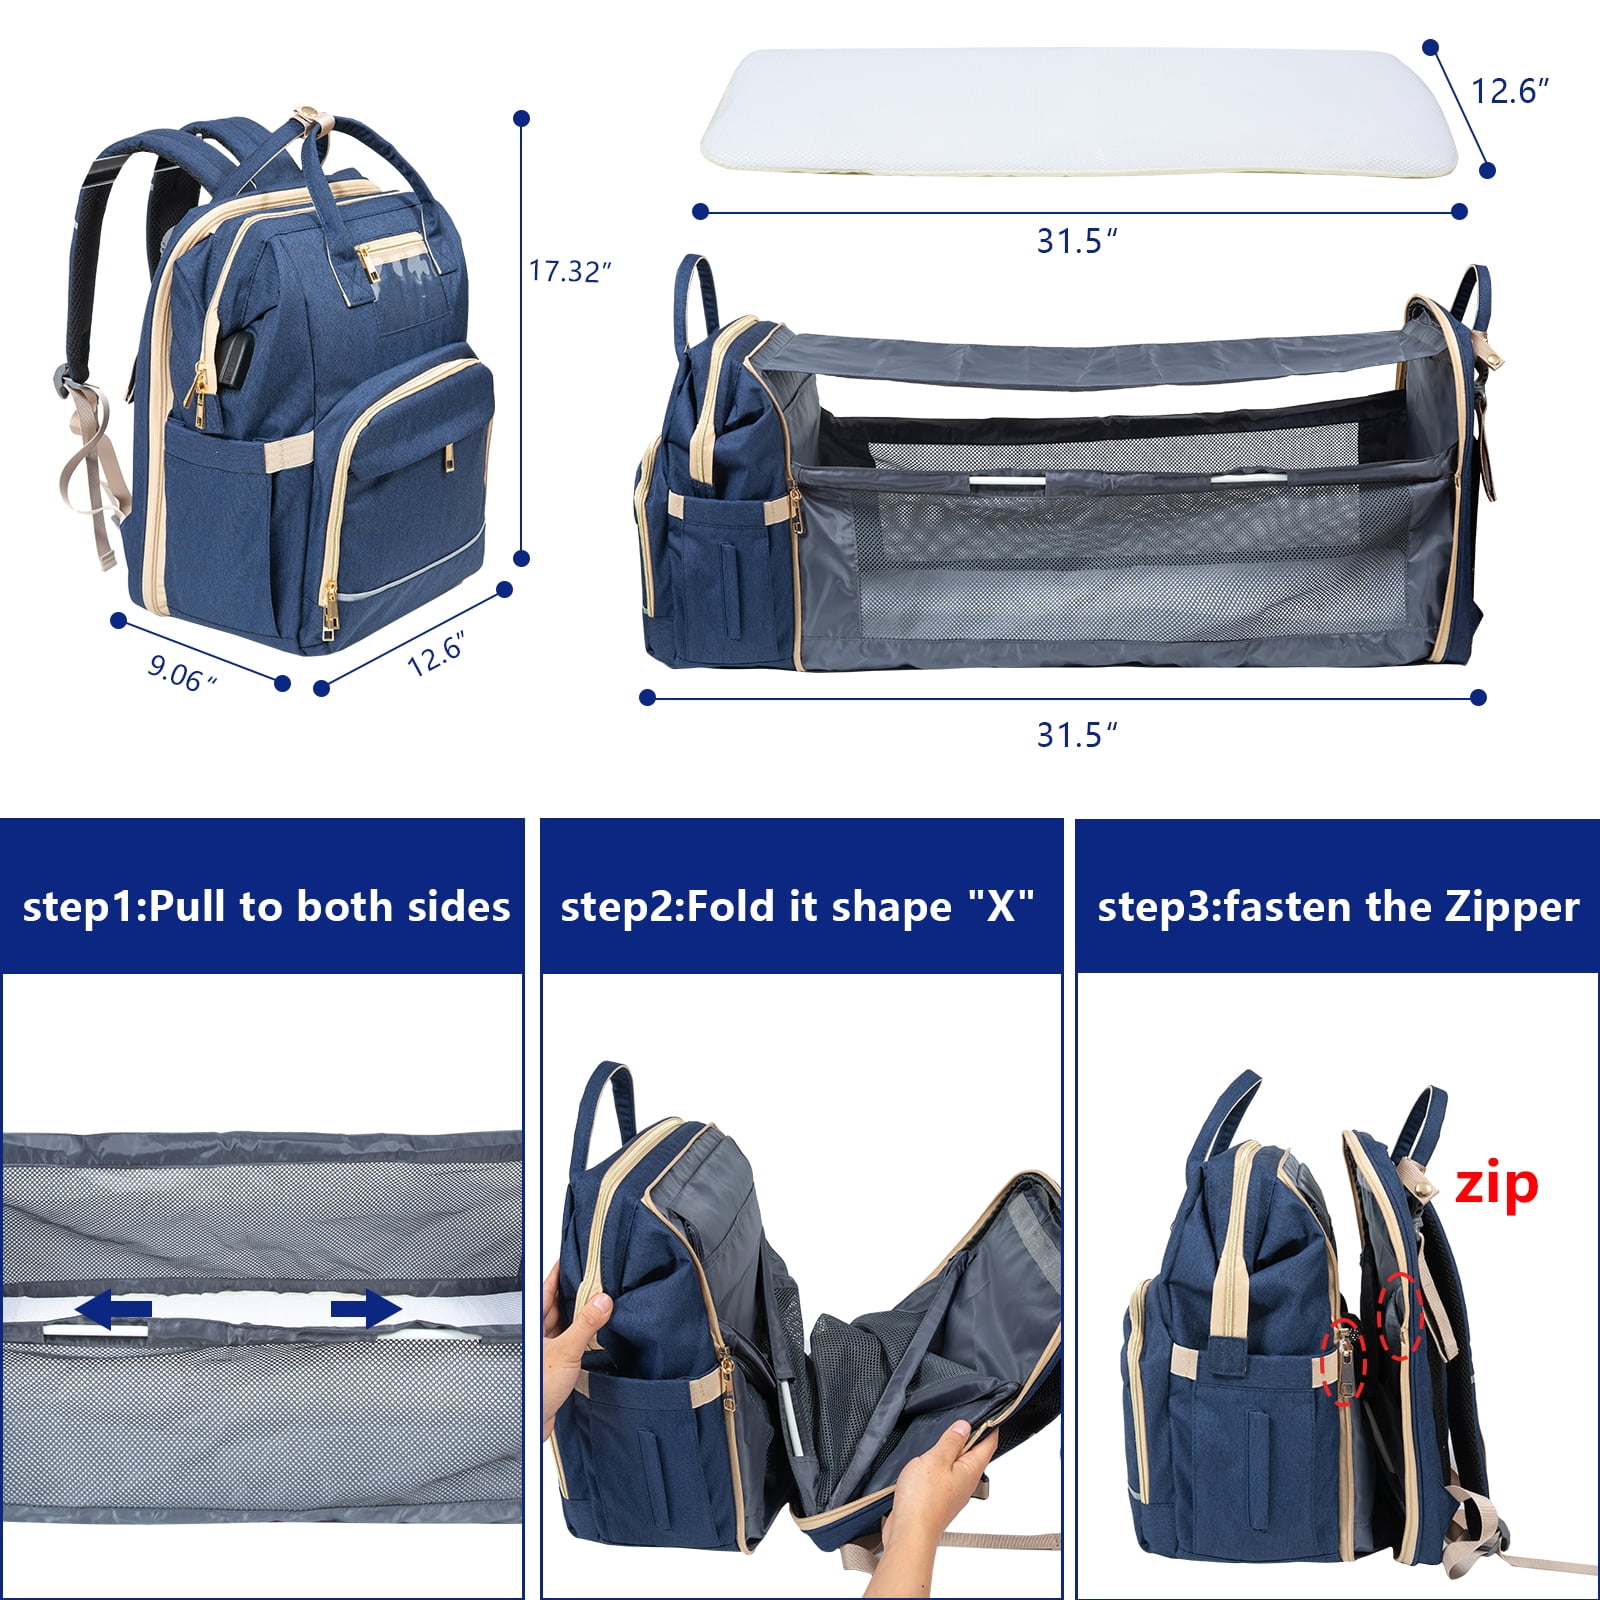 Portable Travel Bassinets for Babies Wisewater Diaper Bag Backpack with Foldable Baby Bed Baby Travel Crib Bag for Girls Boys Waterproof Mommy Bag with Changing Station USB Charging Port 